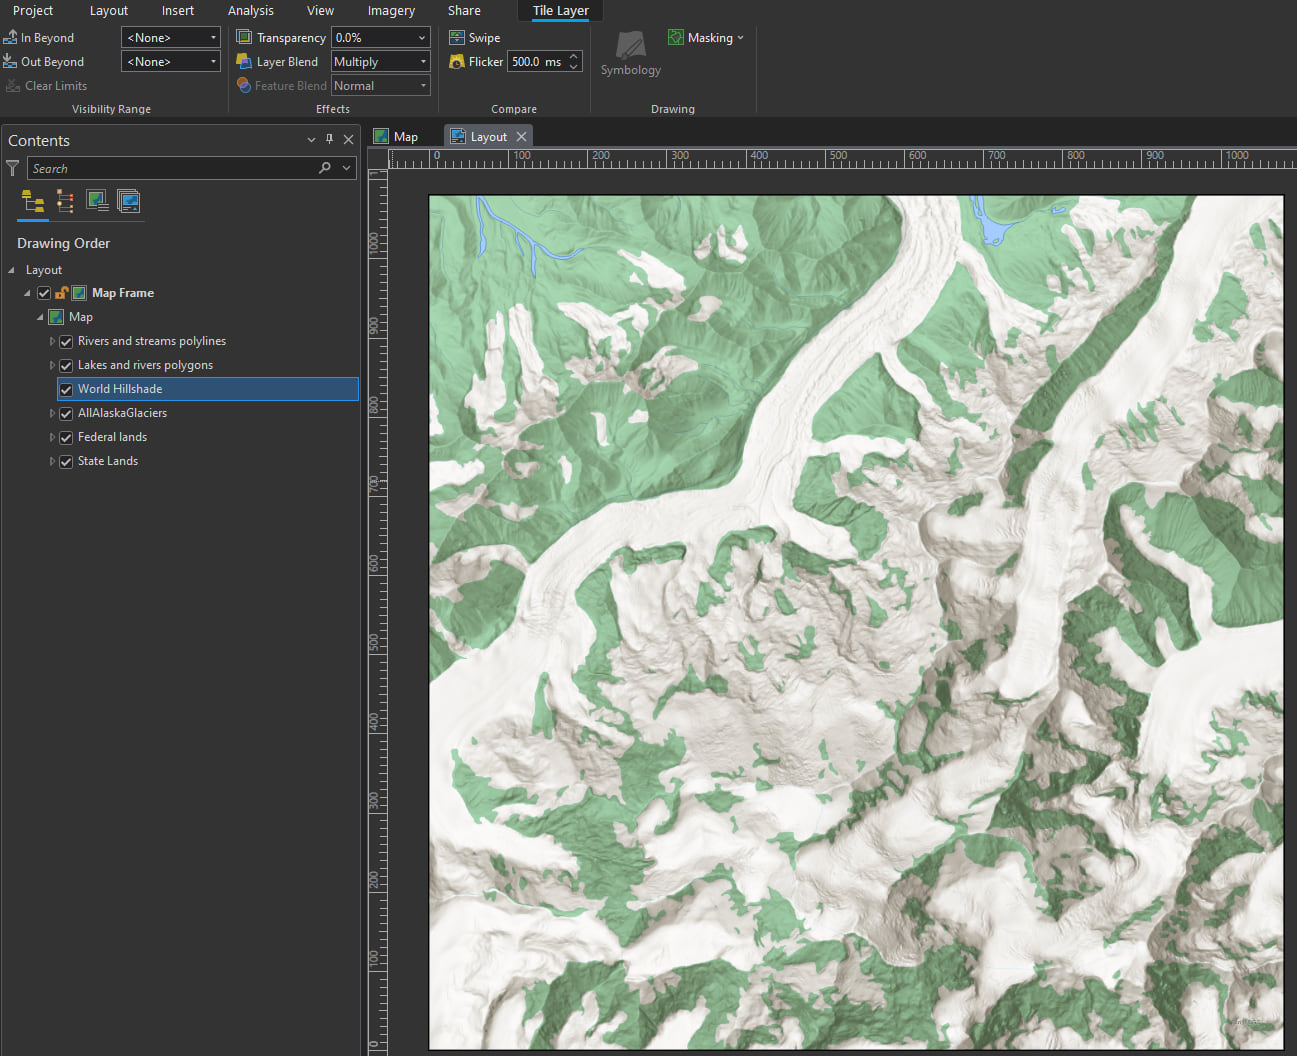 B) ArcGIS Pro. Multiply blend mode has been applied.